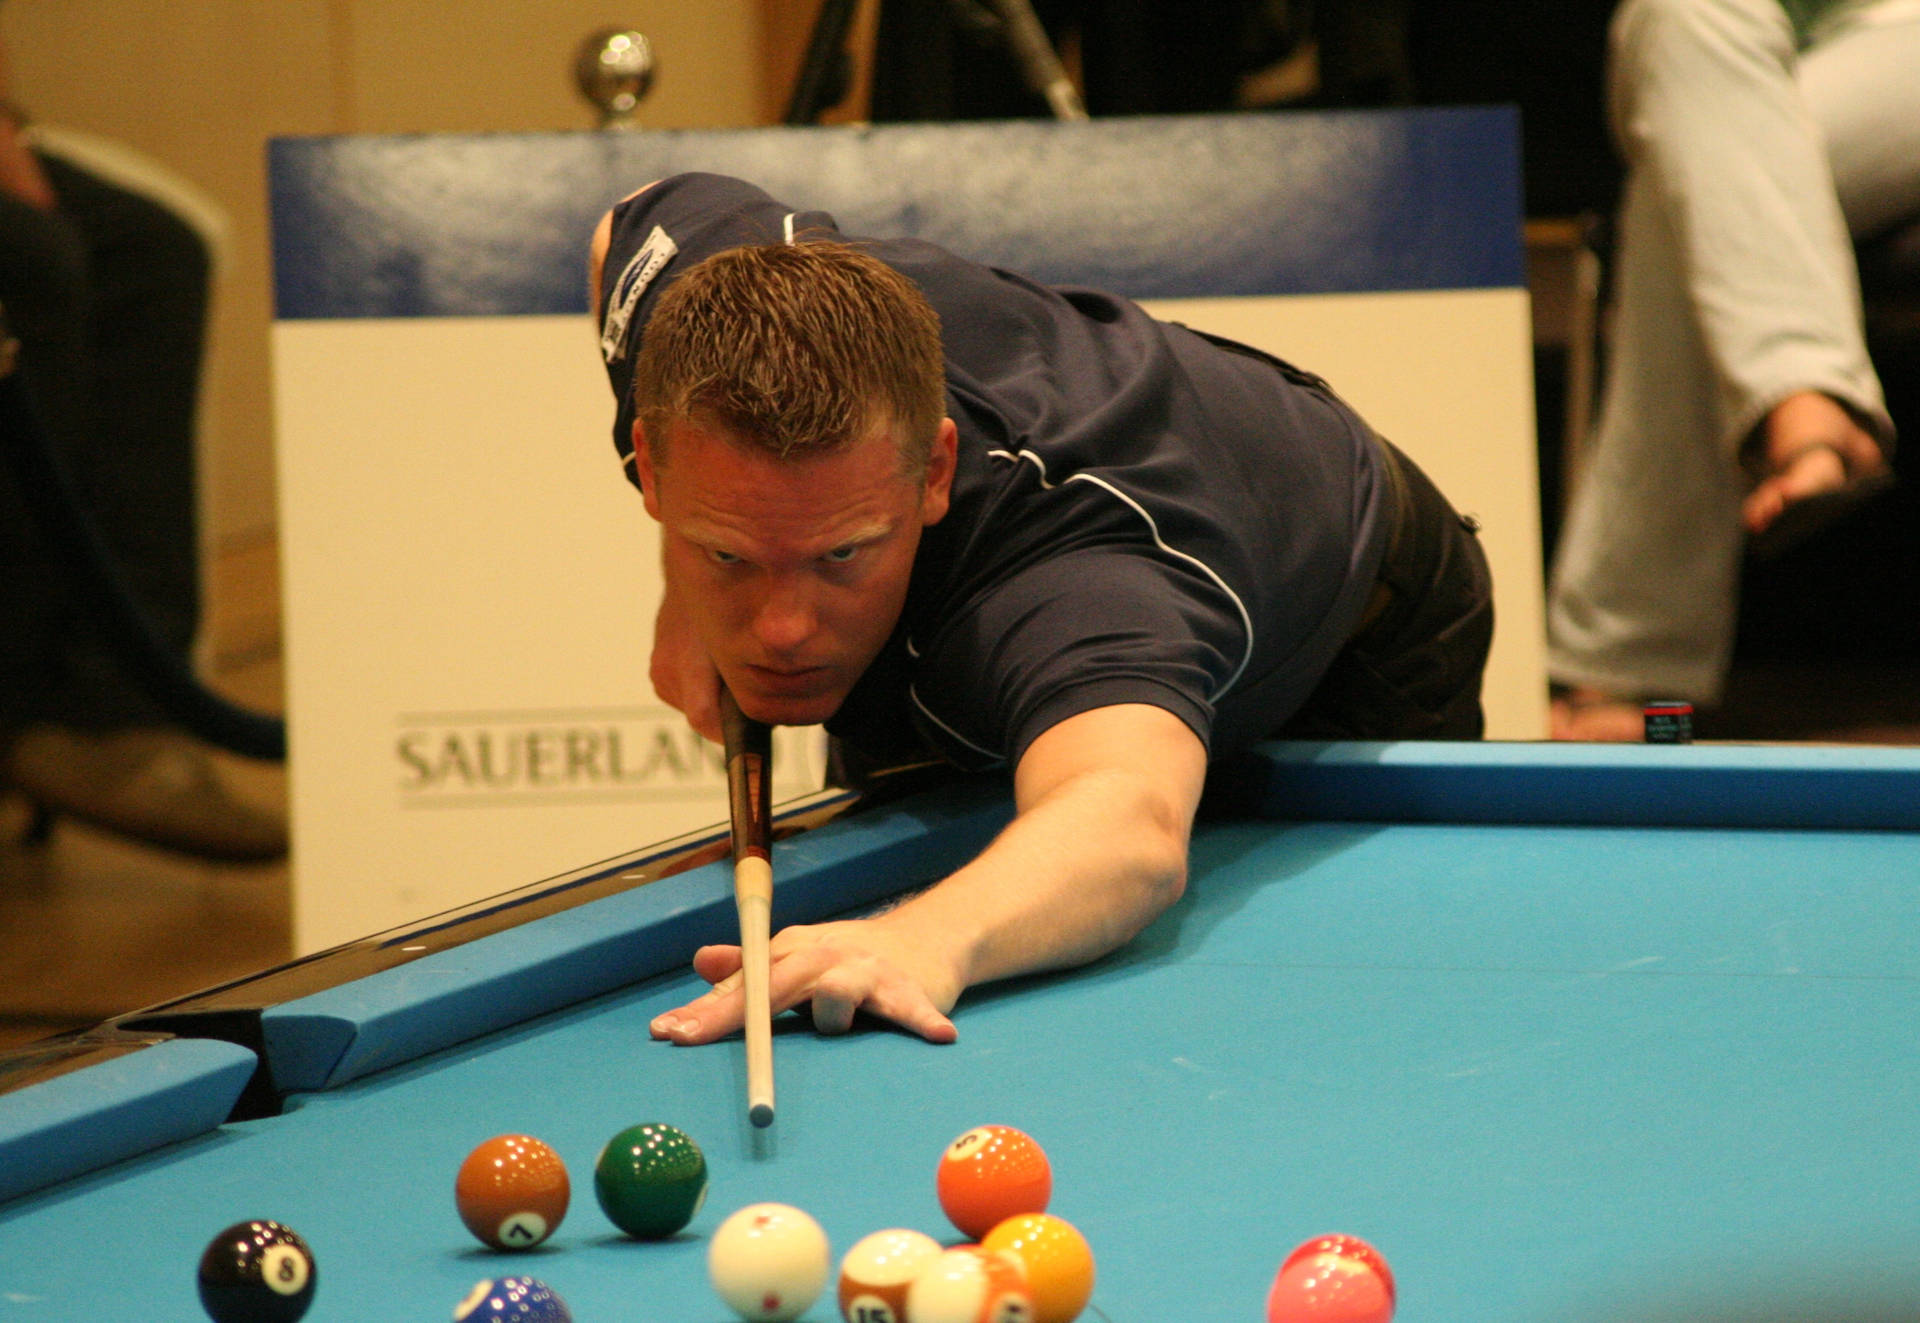 Billiards Athlete With Pool Stick On Blue Pool Table. Wallpaper